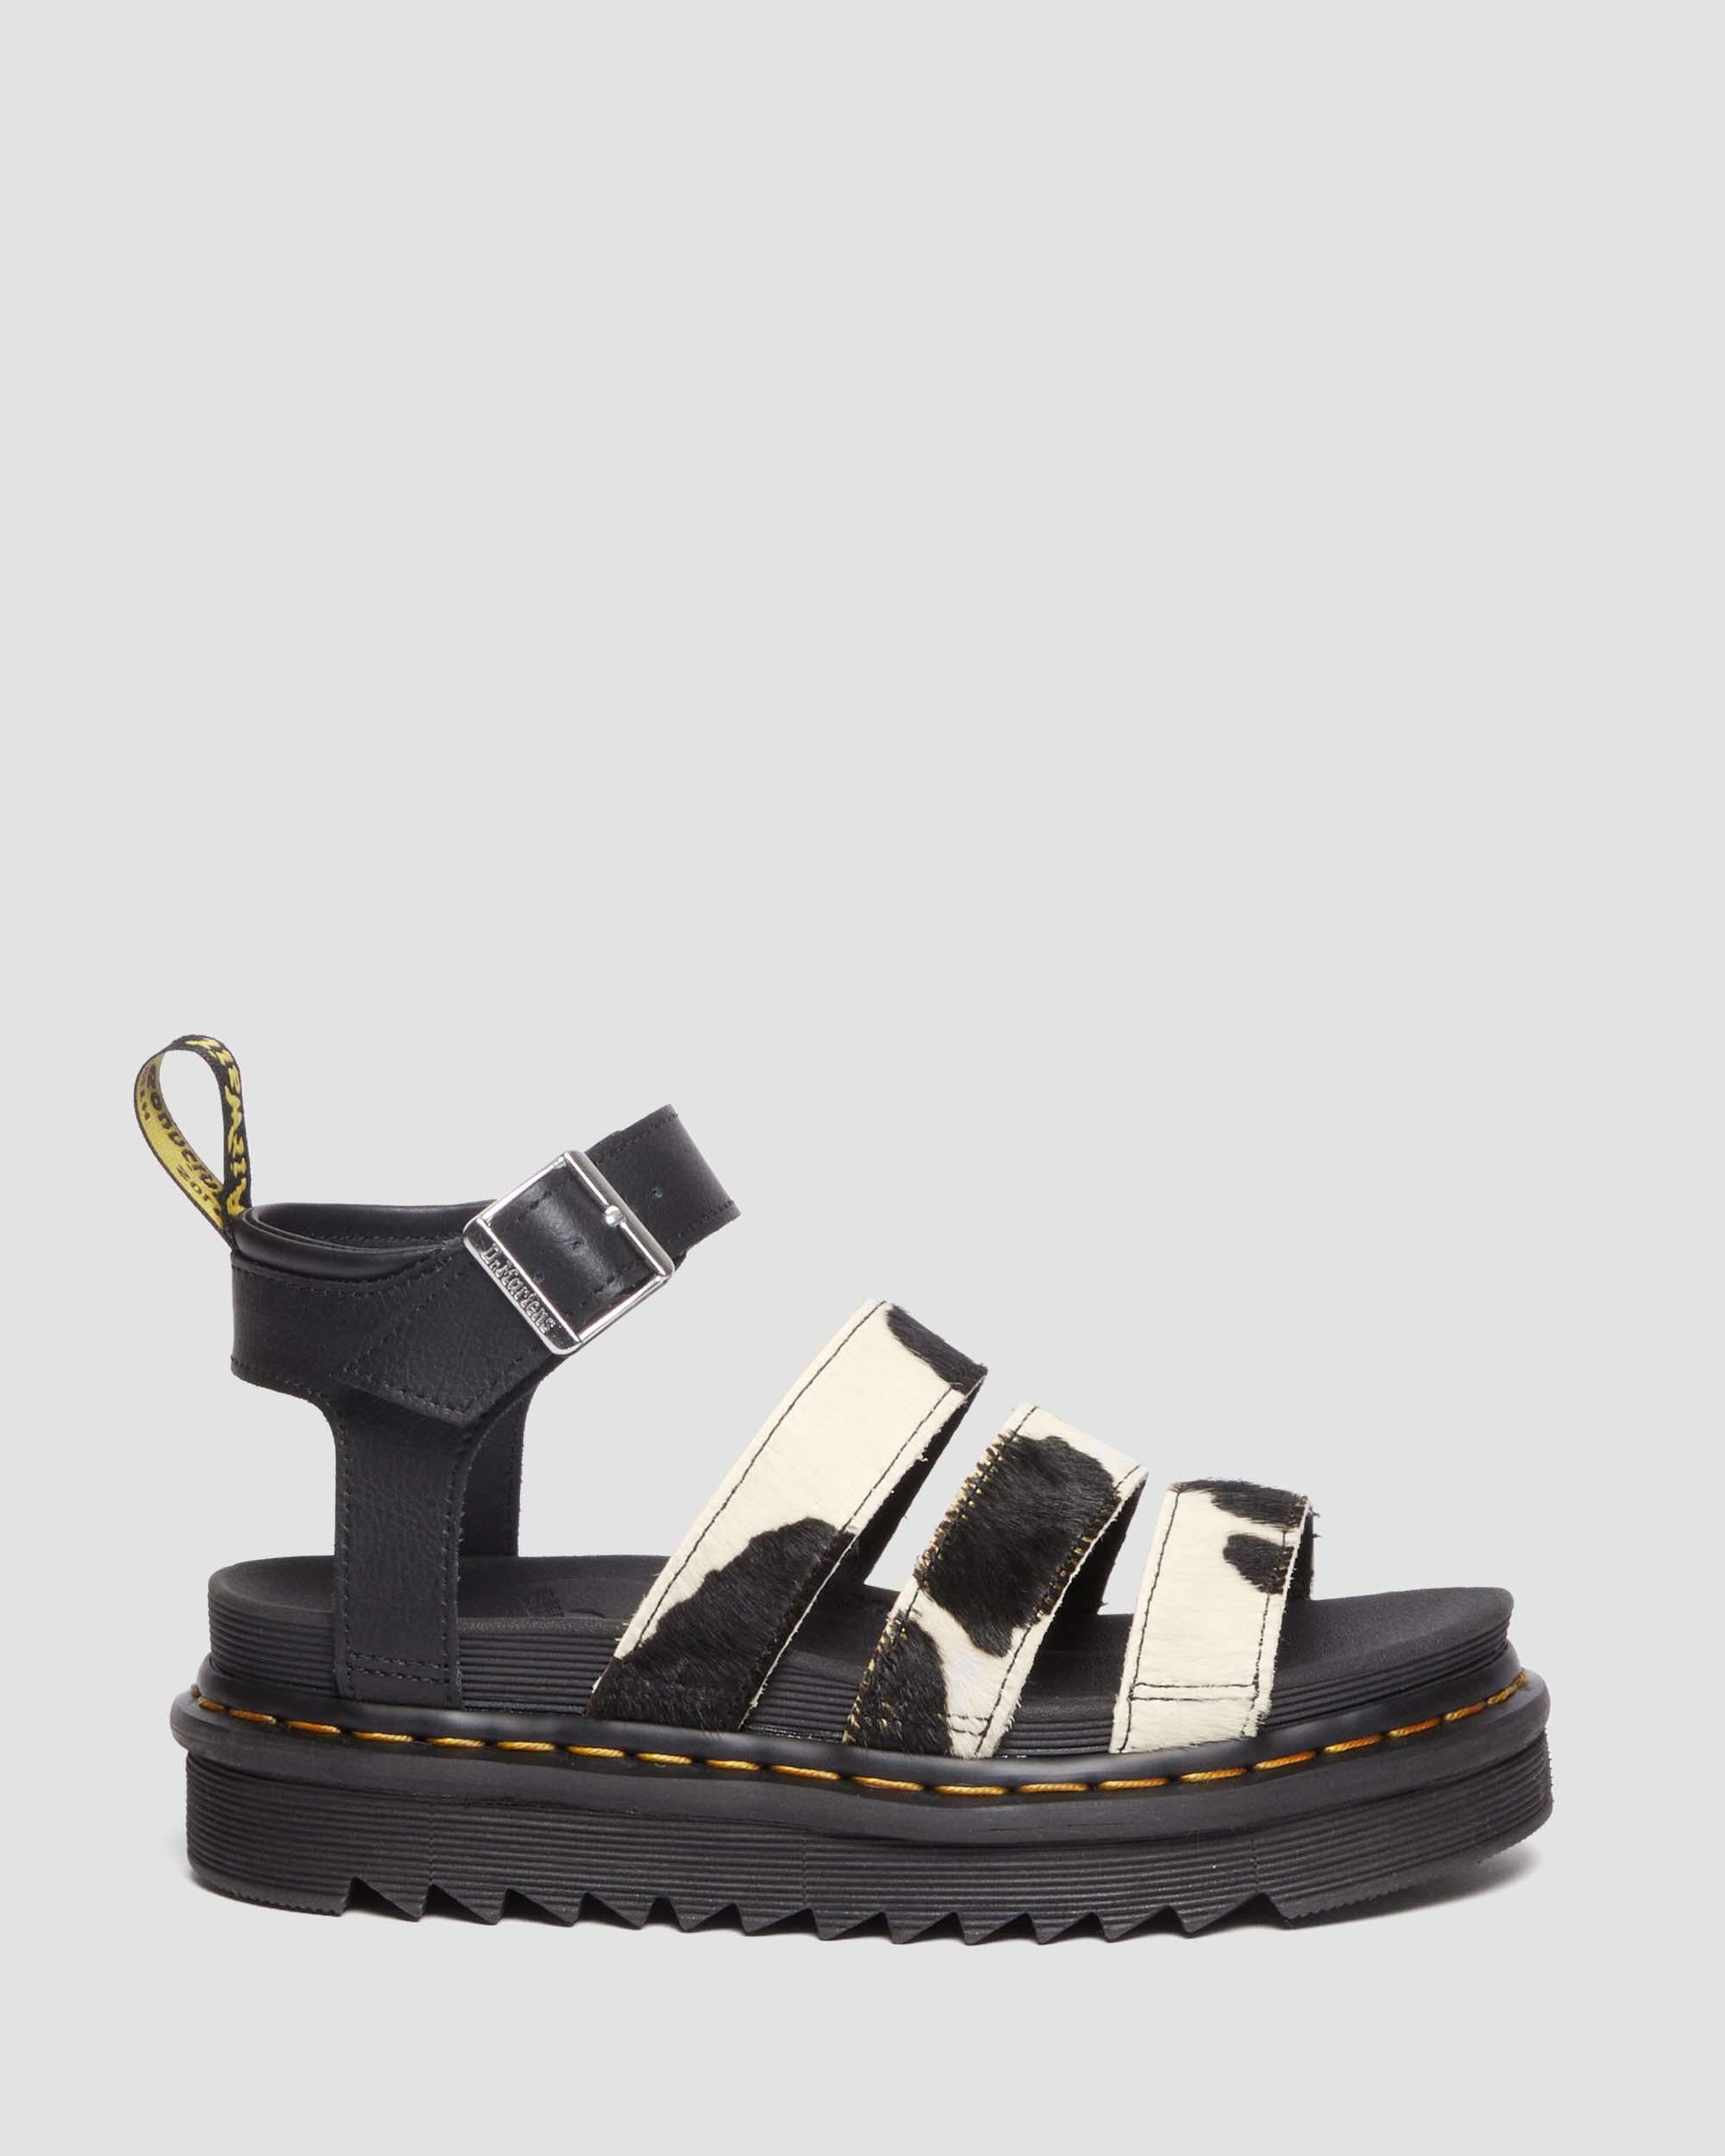 Blaire Hair-On Cow Print Sandals in Black | Dr. Martens